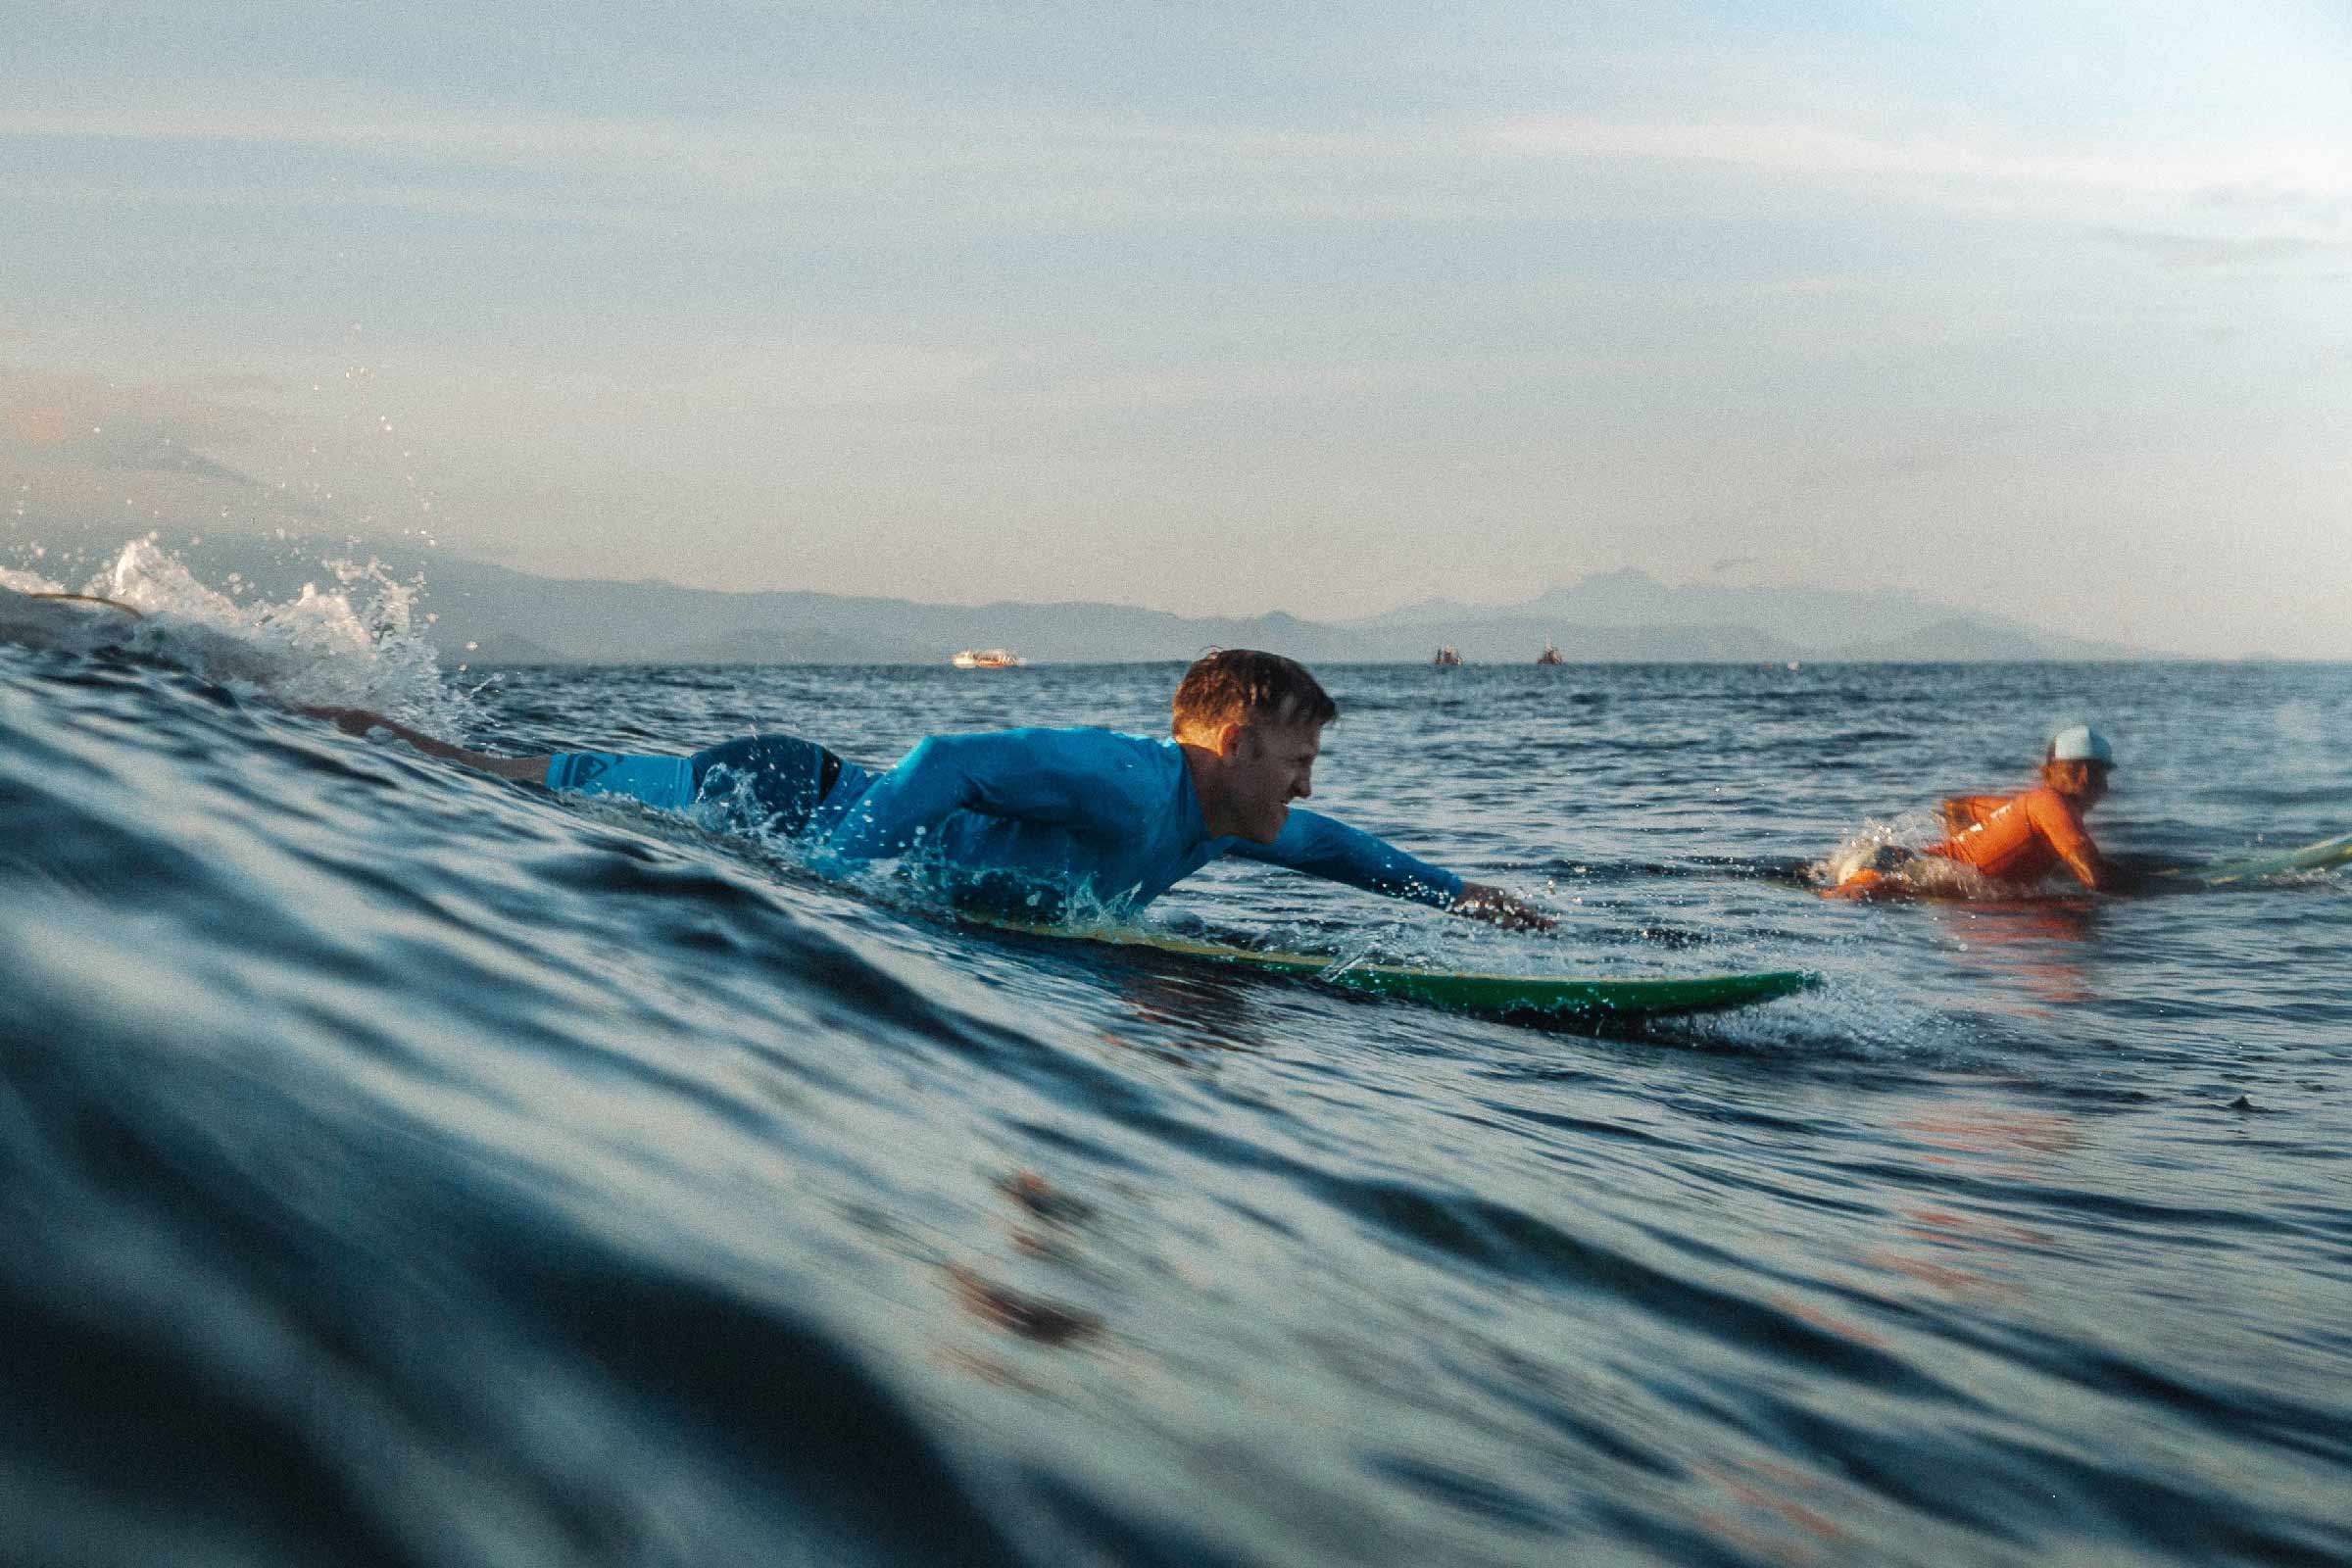 10 Tips to Catch more Waves - Intermediate Surf Advice